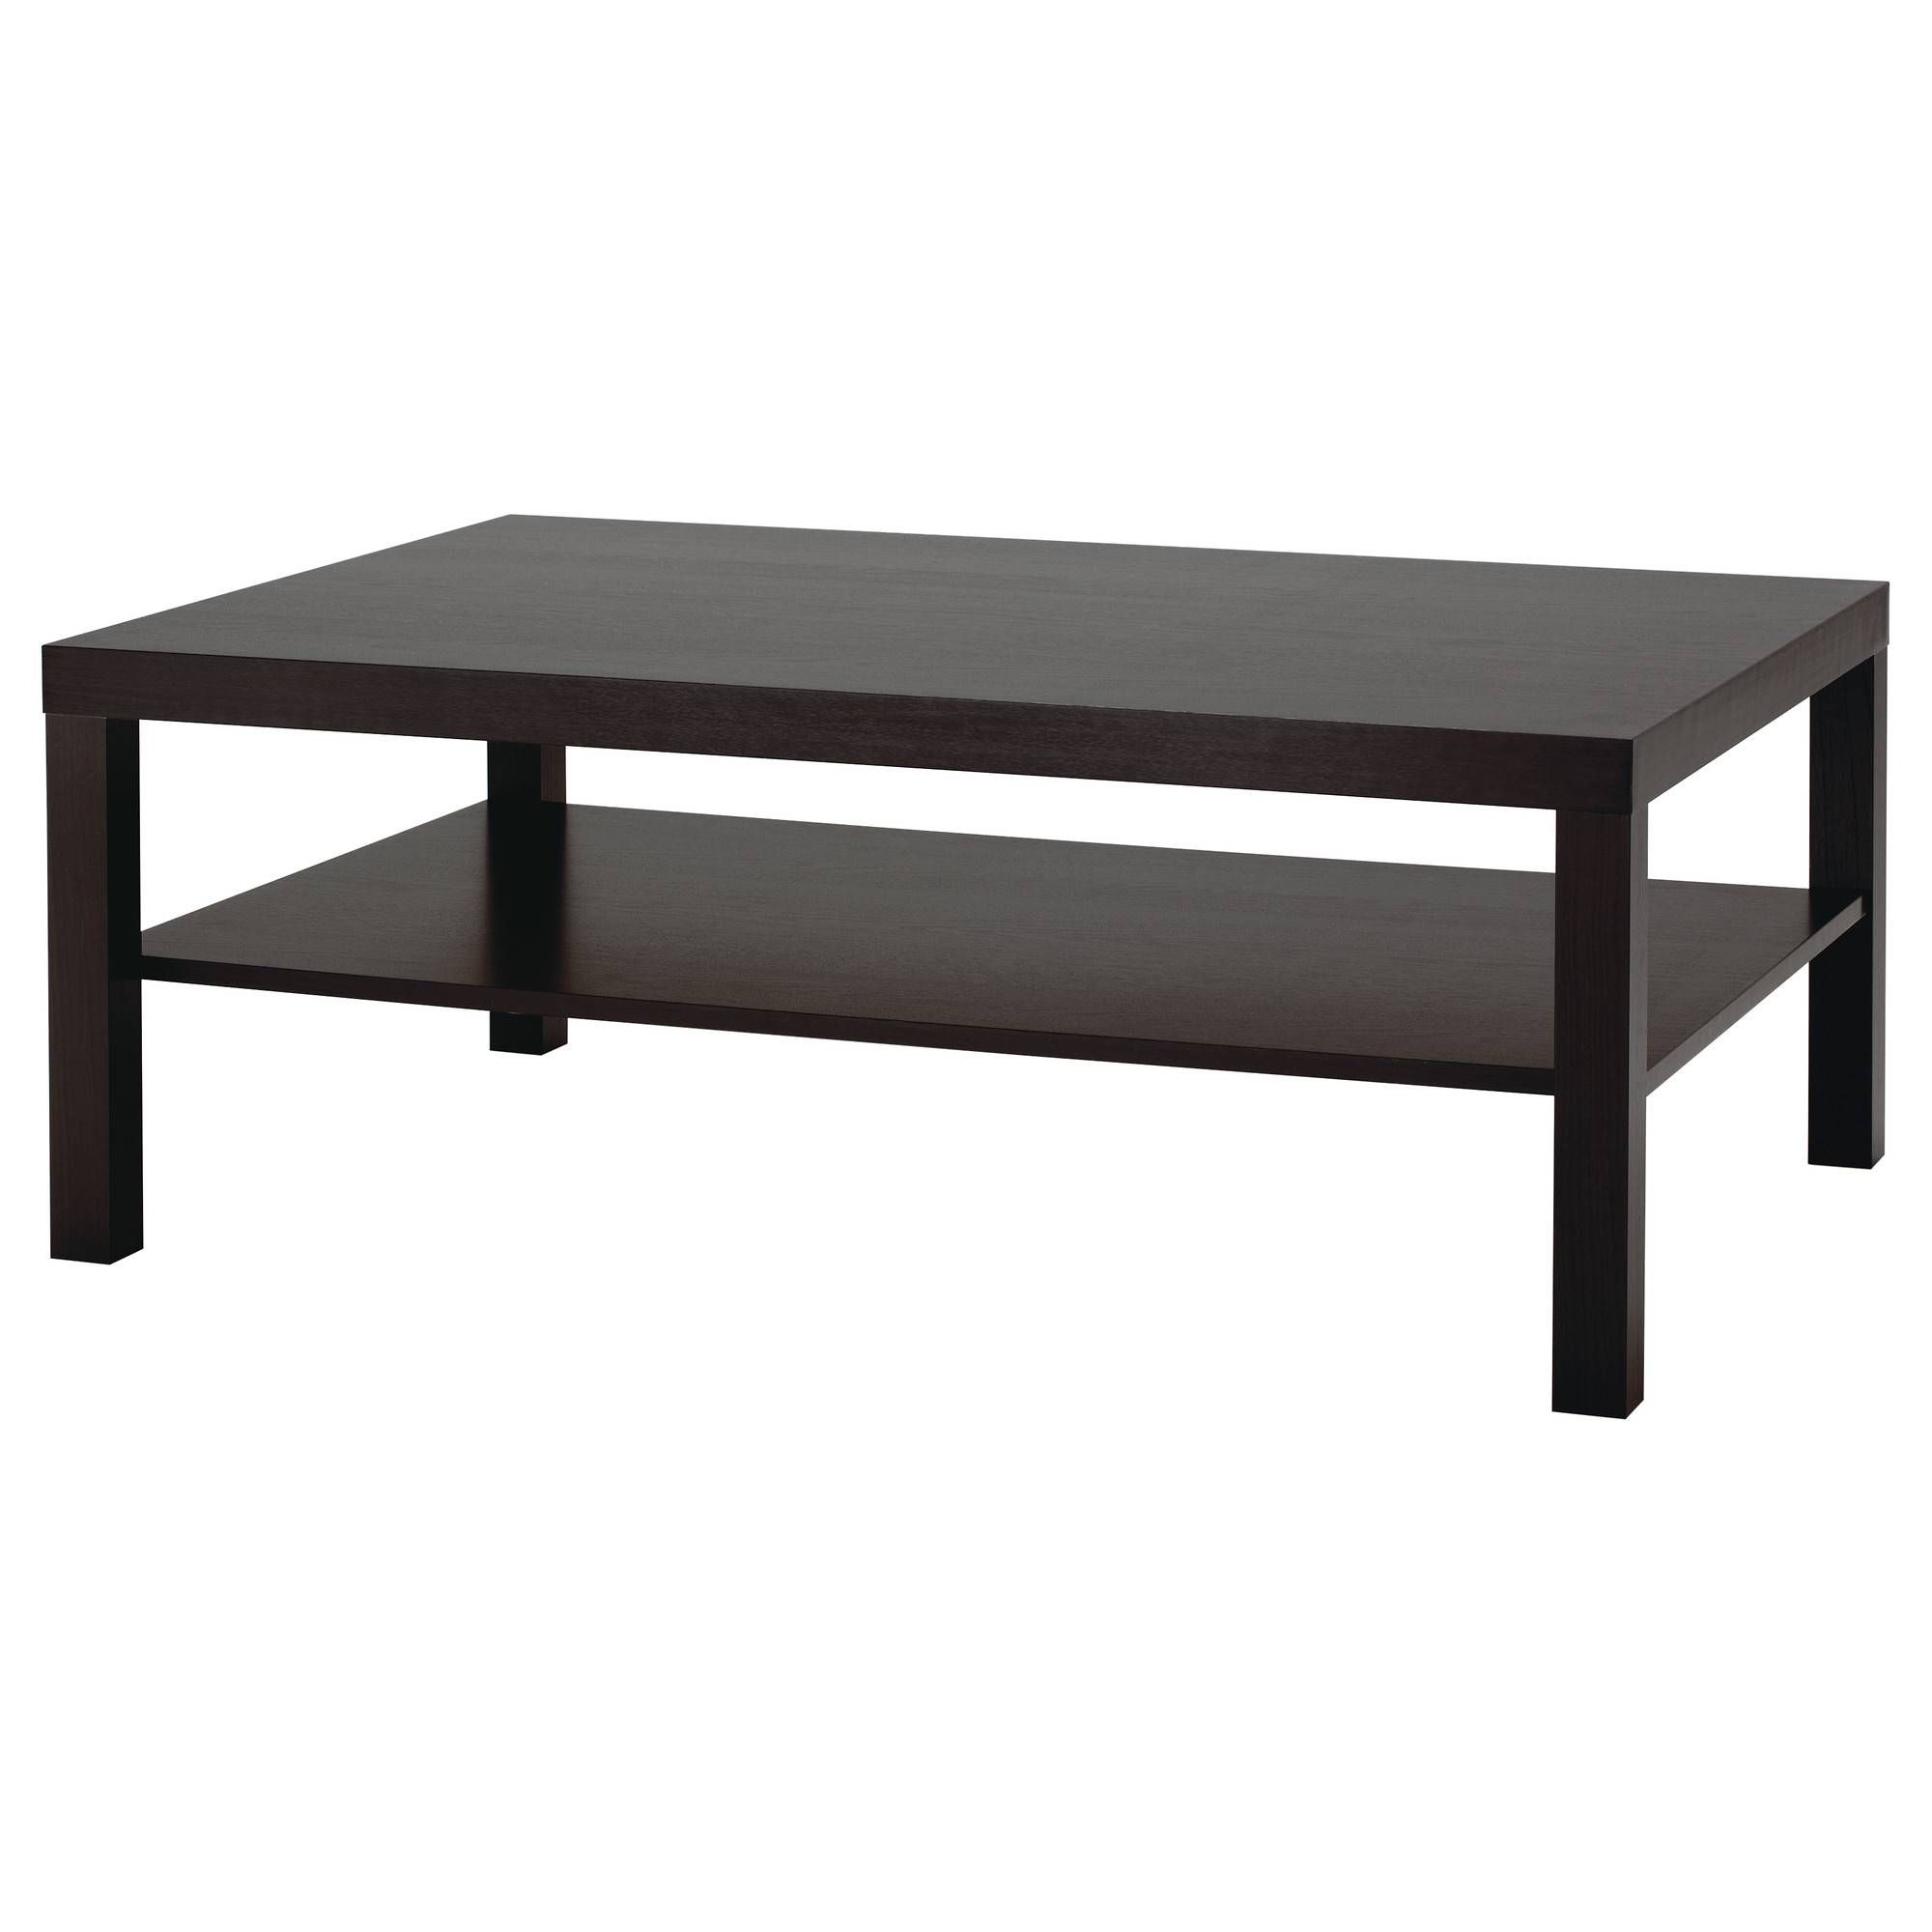 Lack Coffee Table – Black Brown – Ikea For White And Black Coffee Tables (View 5 of 30)